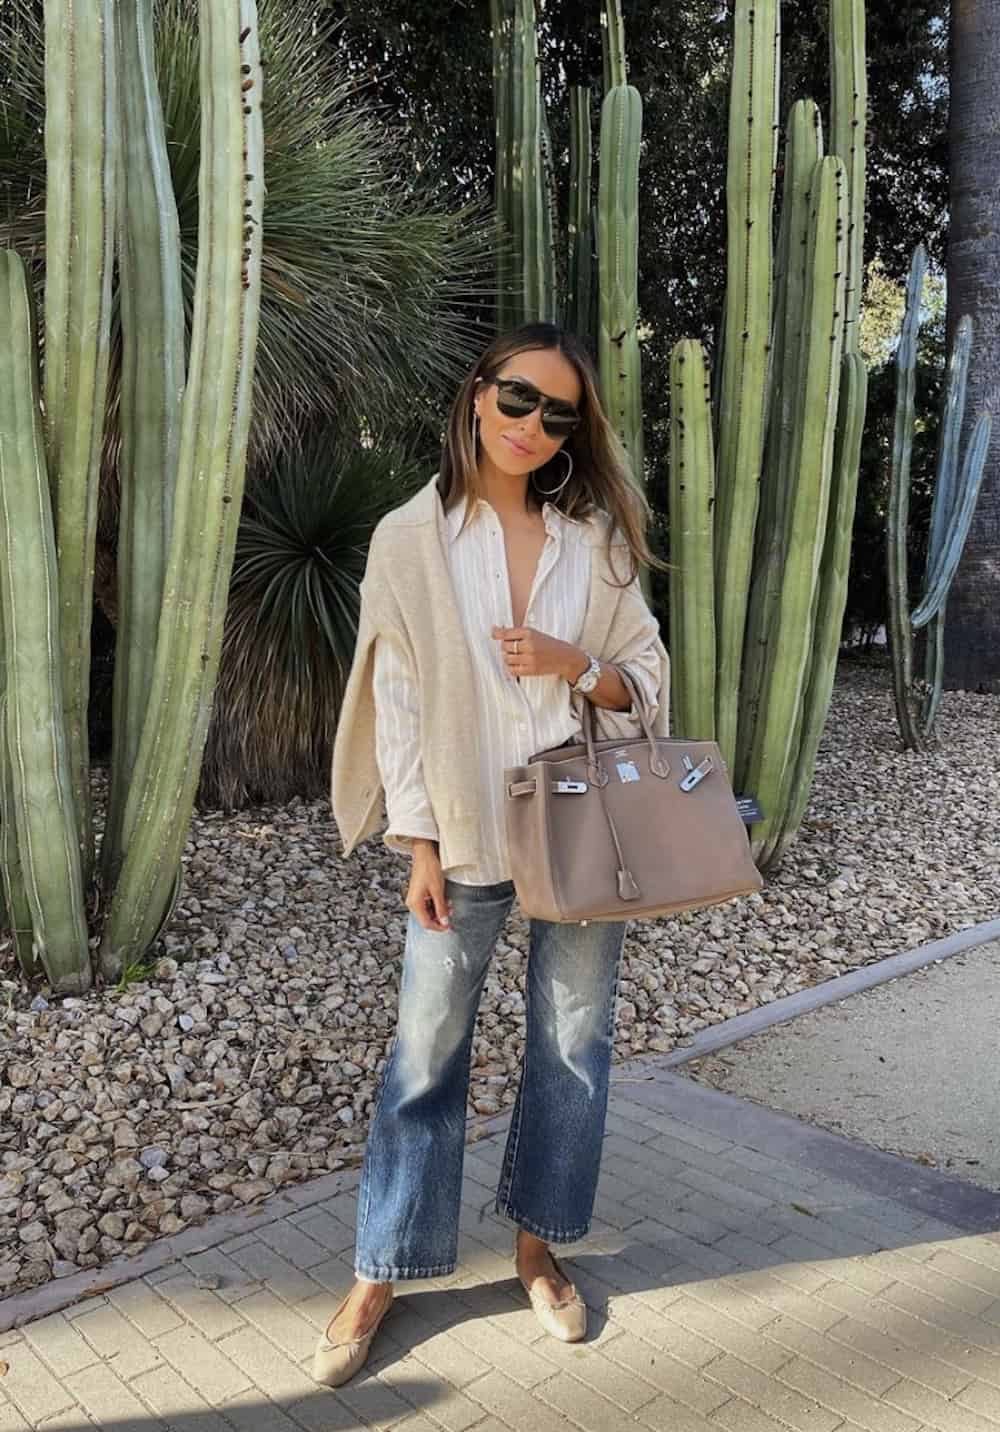 image of a woman in a white shirt, blue jeans, ballet flats, and carrying a taupe Birkin bag